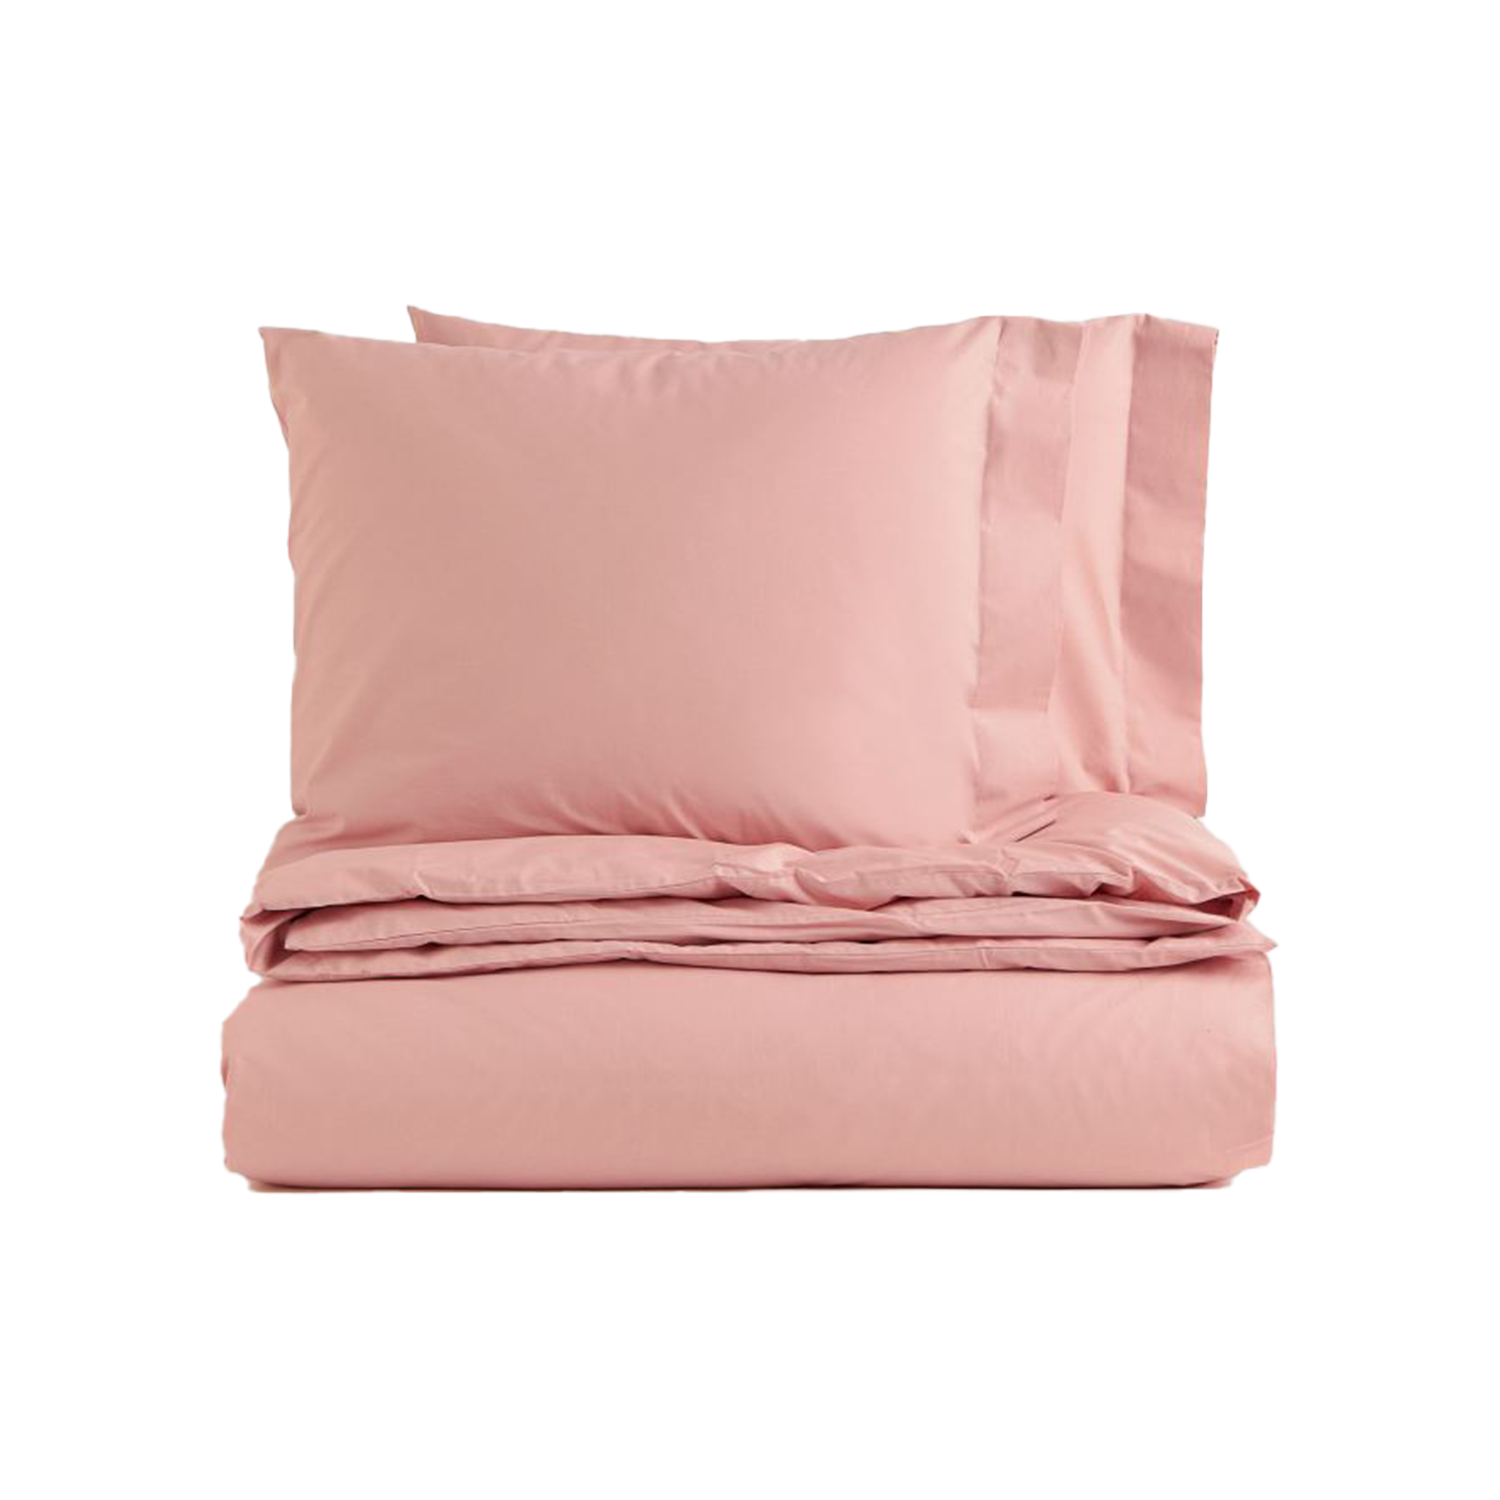 Cotton percale King/Queen Duvet Set in blush pink